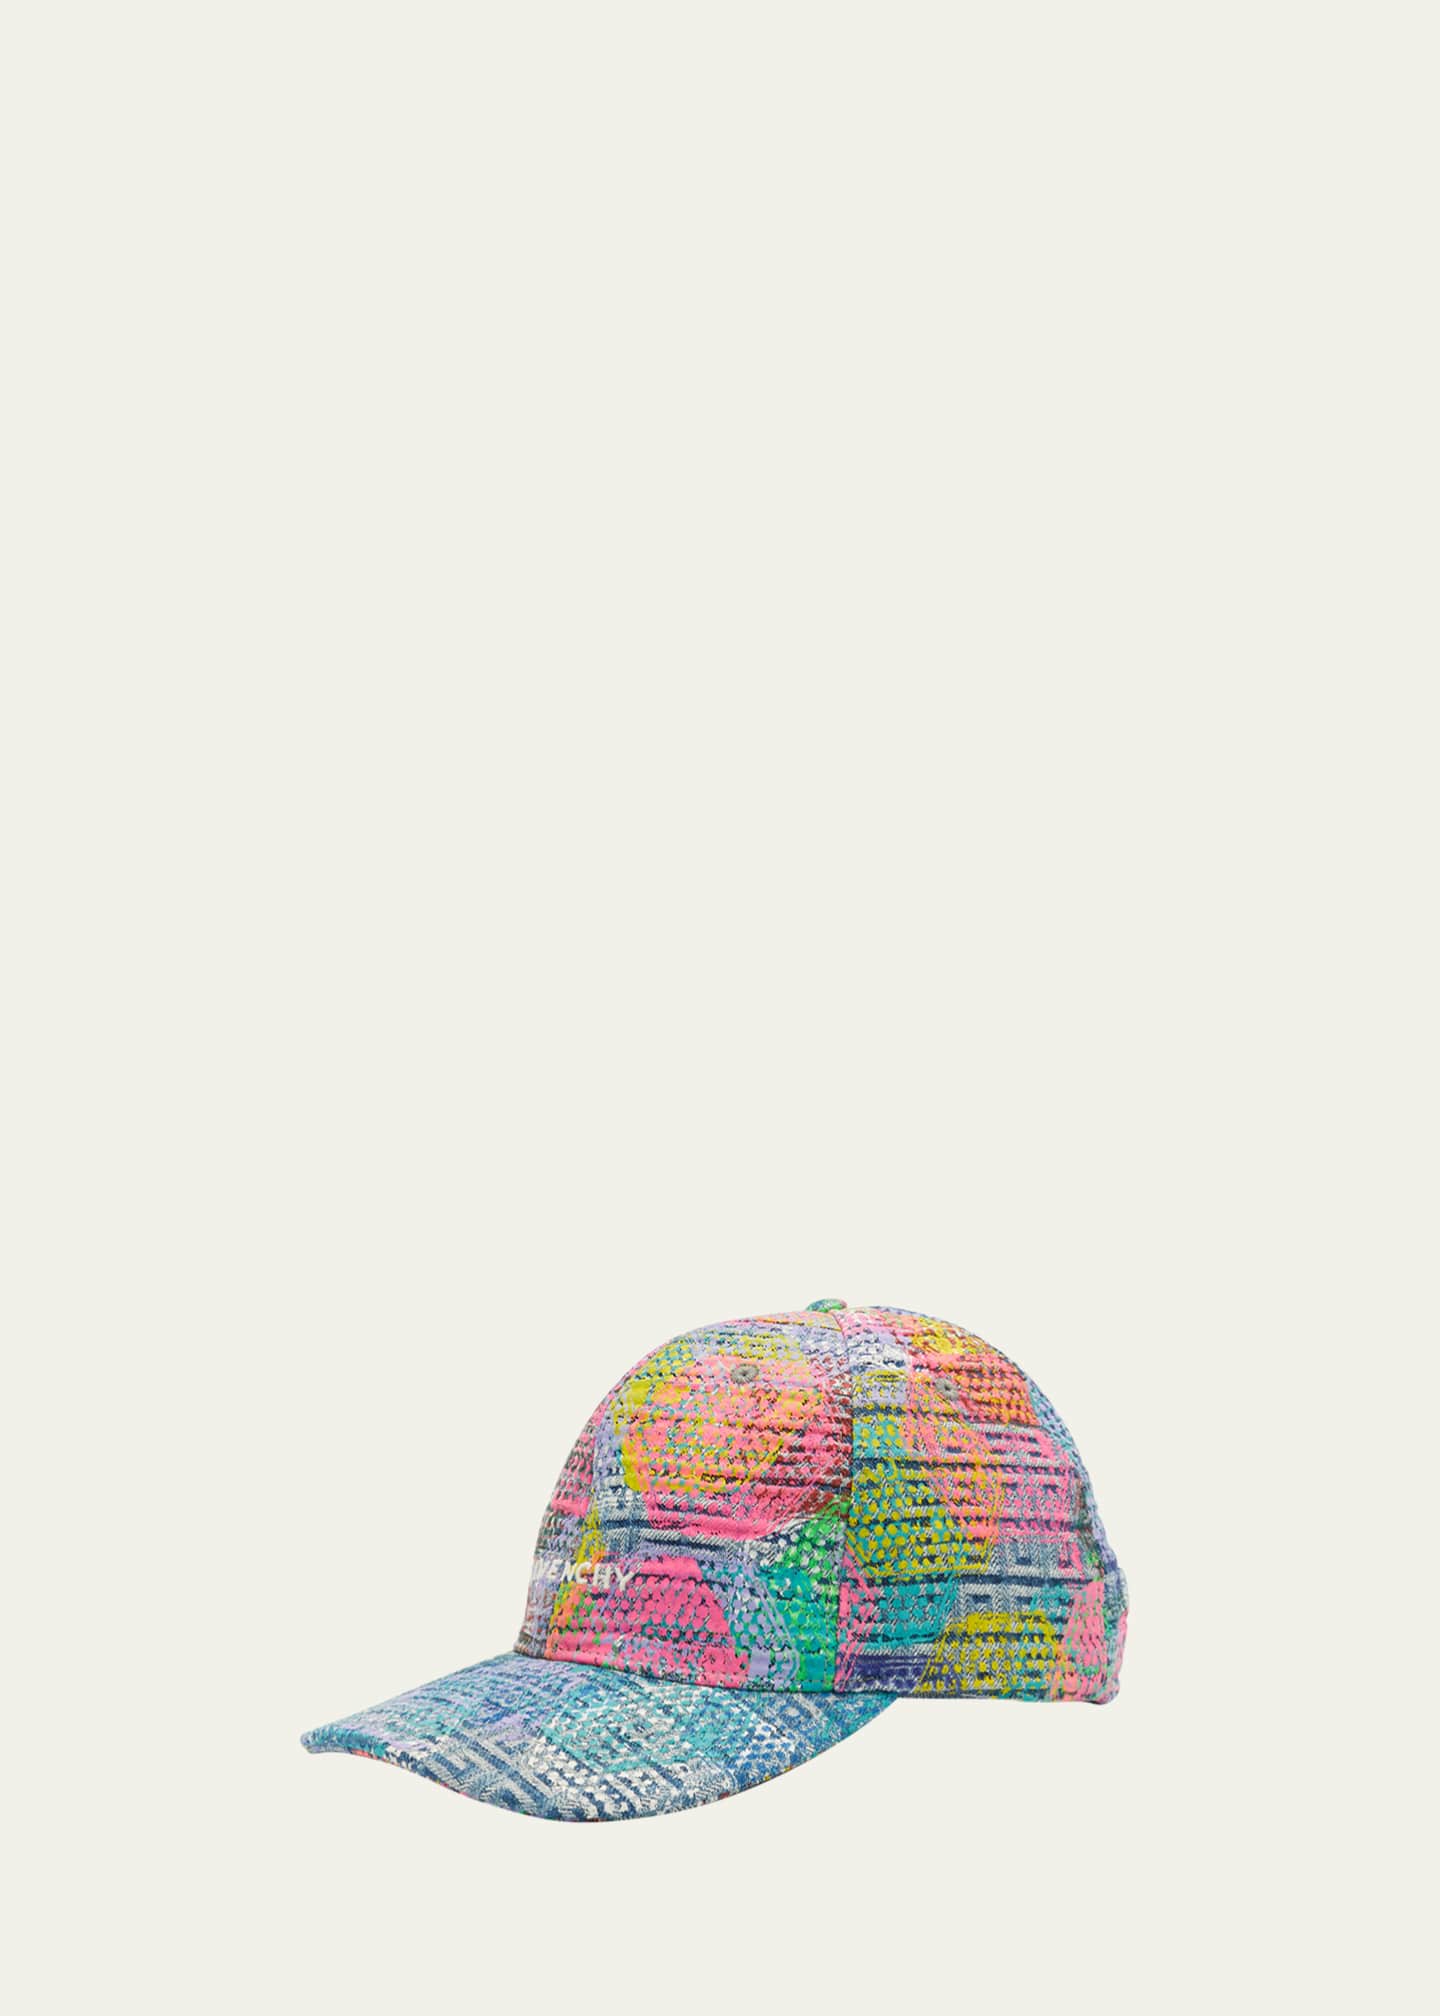 Givenchy x BSTROY Men's Multicolor Embroidered Baseball Cap - Bergdorf  Goodman